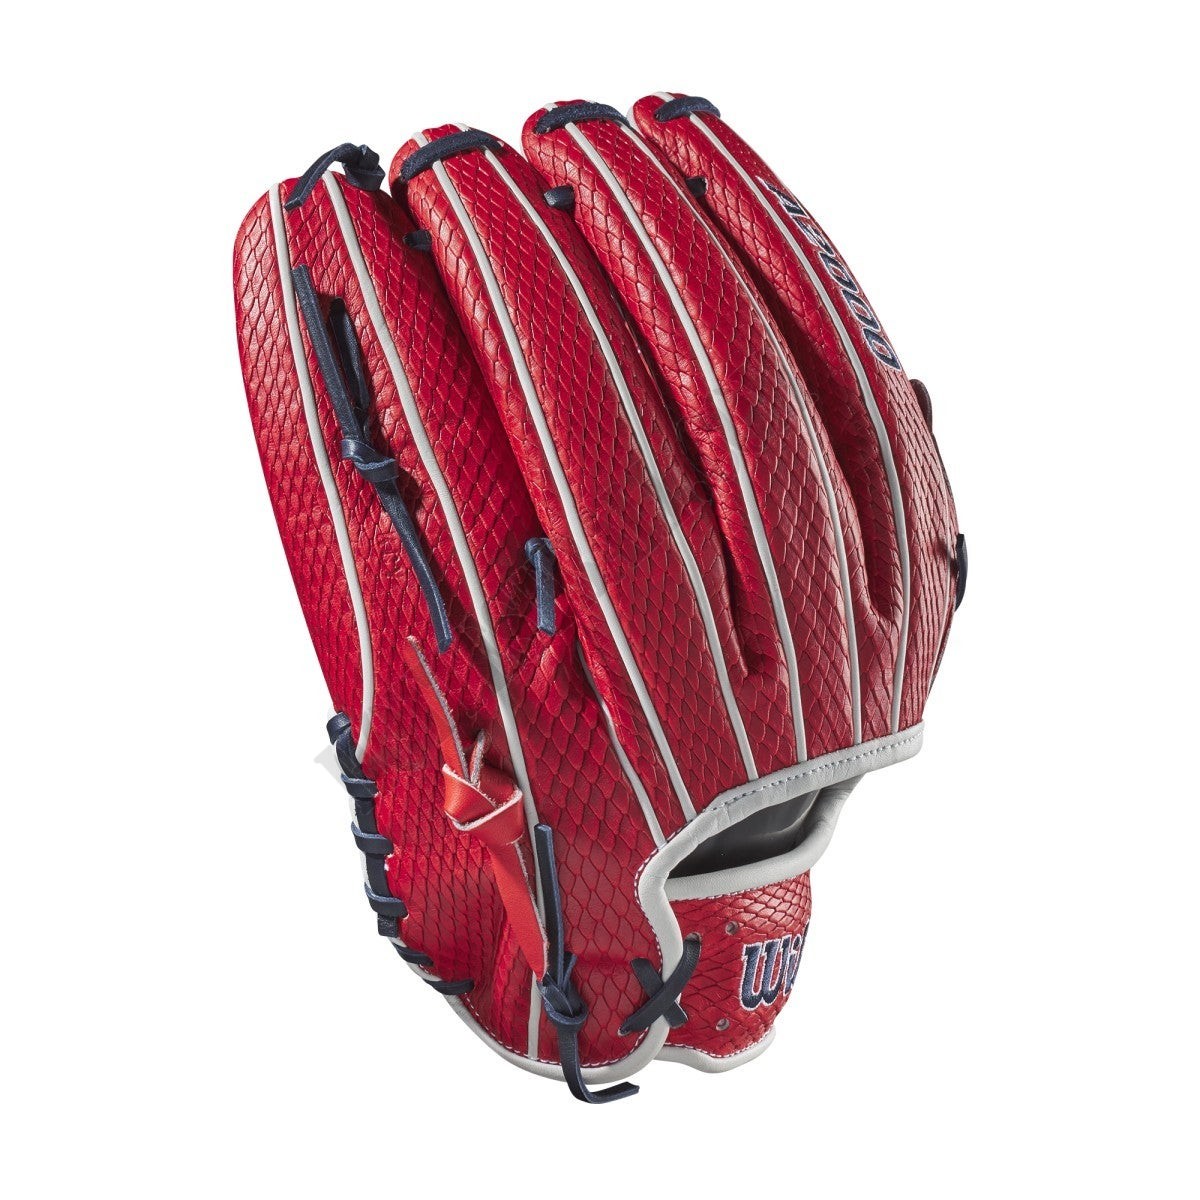 2021 A2000 B125 12.5" Carlos Carrasco Game Model Pitcher's Baseball Glove ● Wilson Promotions - -4